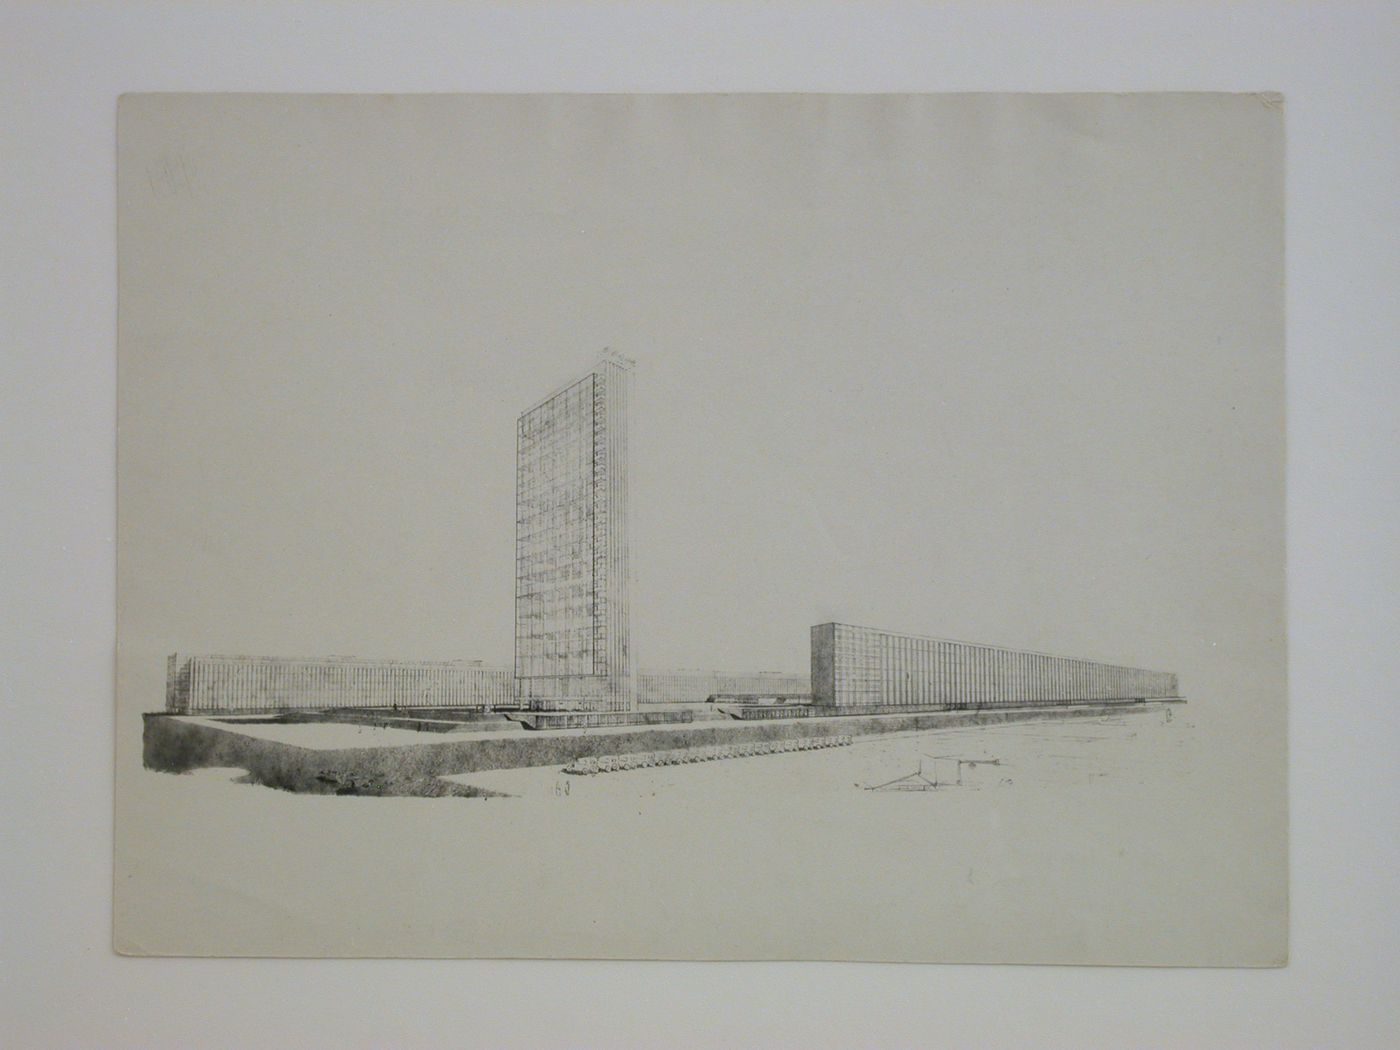 Photograph of a perspective drawing for the Building of Industry, Sverdlovsk, Soviet Union (now Ekaterinburg, Russia)